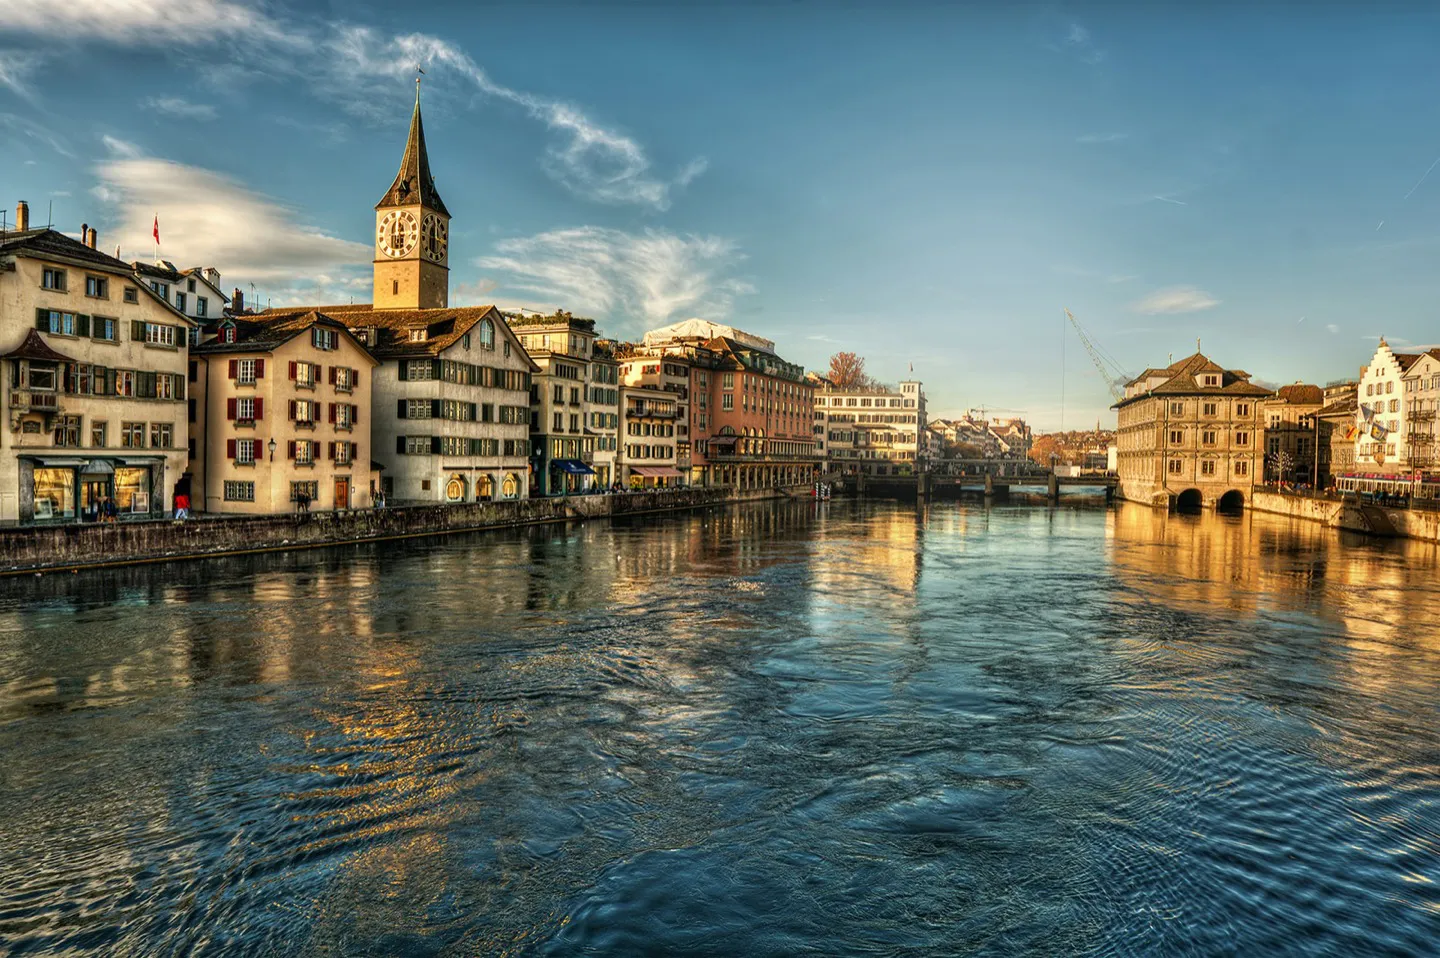 Visit Zurich on a self guided driving tour of Switzerland